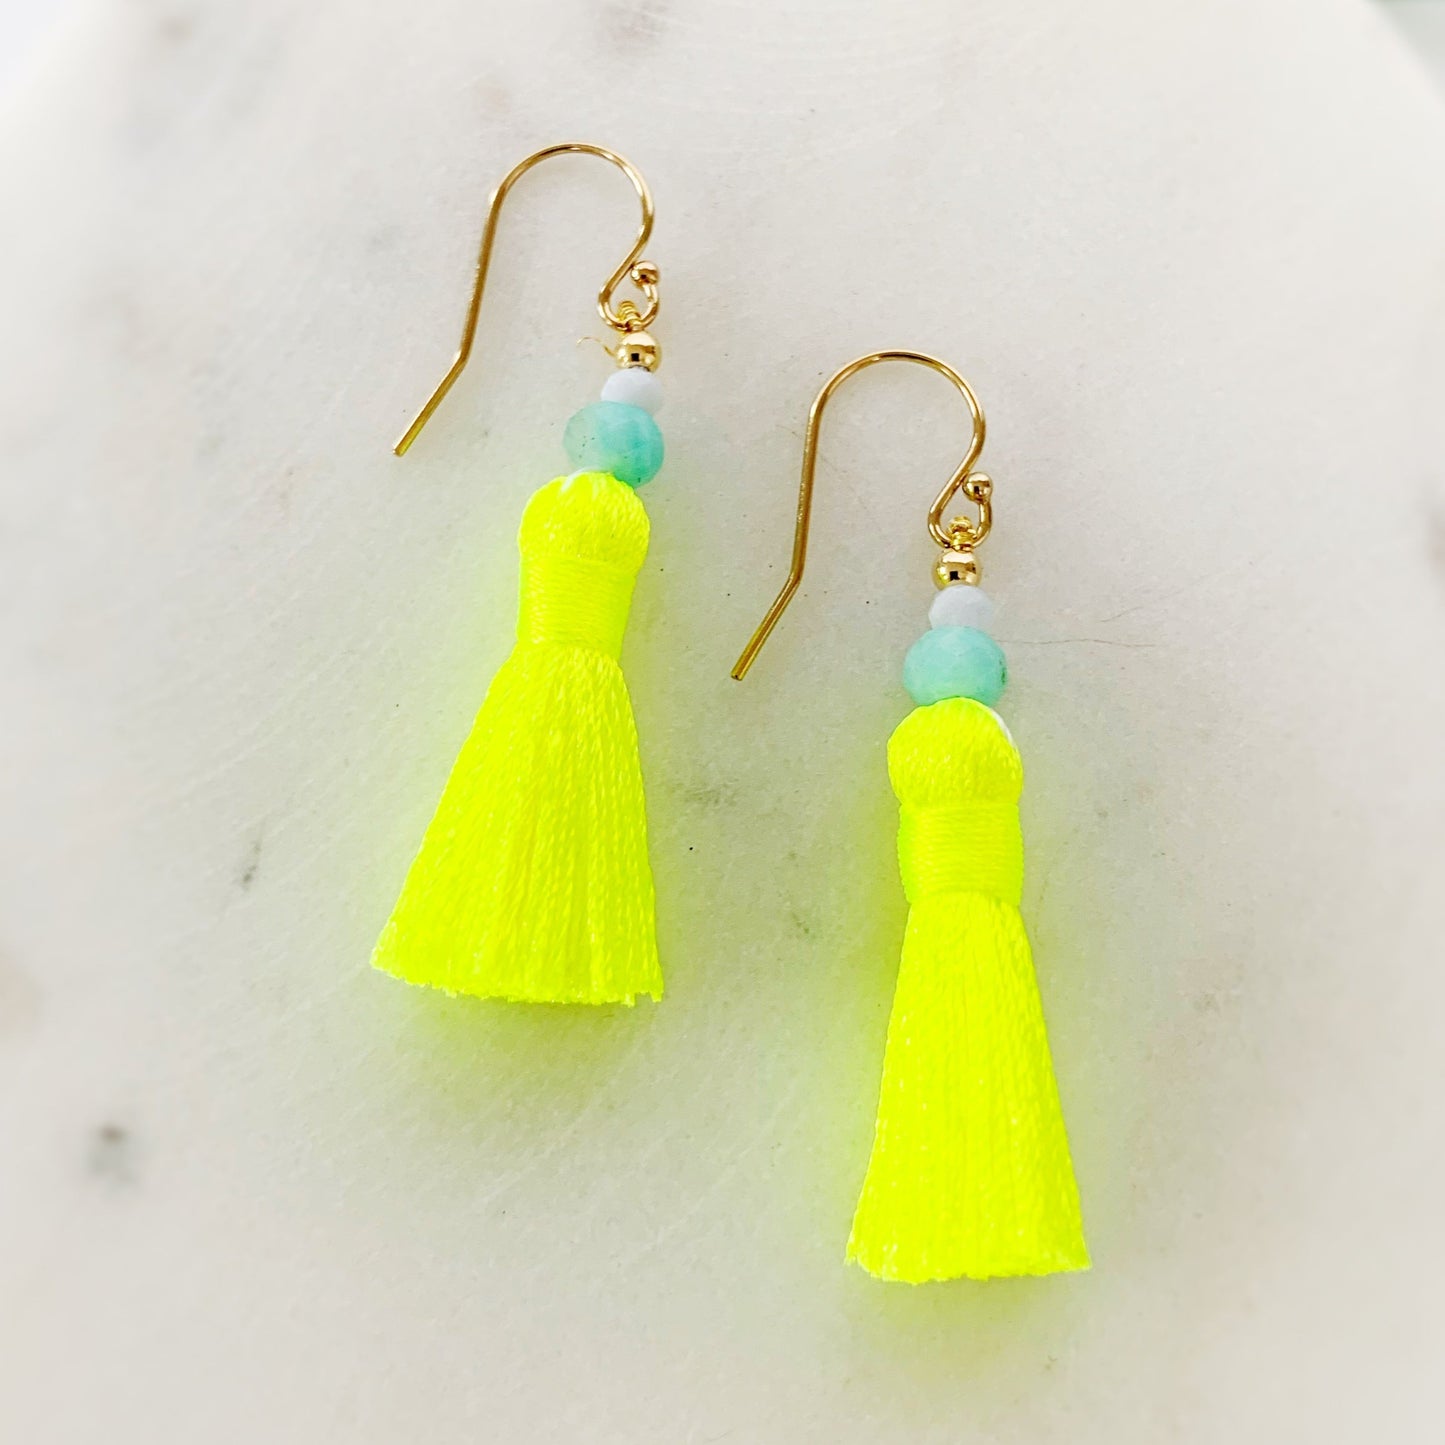 a close up view of the captiva tassel earrings from the mermaids and madeleines sunshine collection. The earrings have bright neon yellow tassels and amazonite and blue lace agate beads with 14k gold filled earring findings. This pair is photographed on a white lightly marbled surface